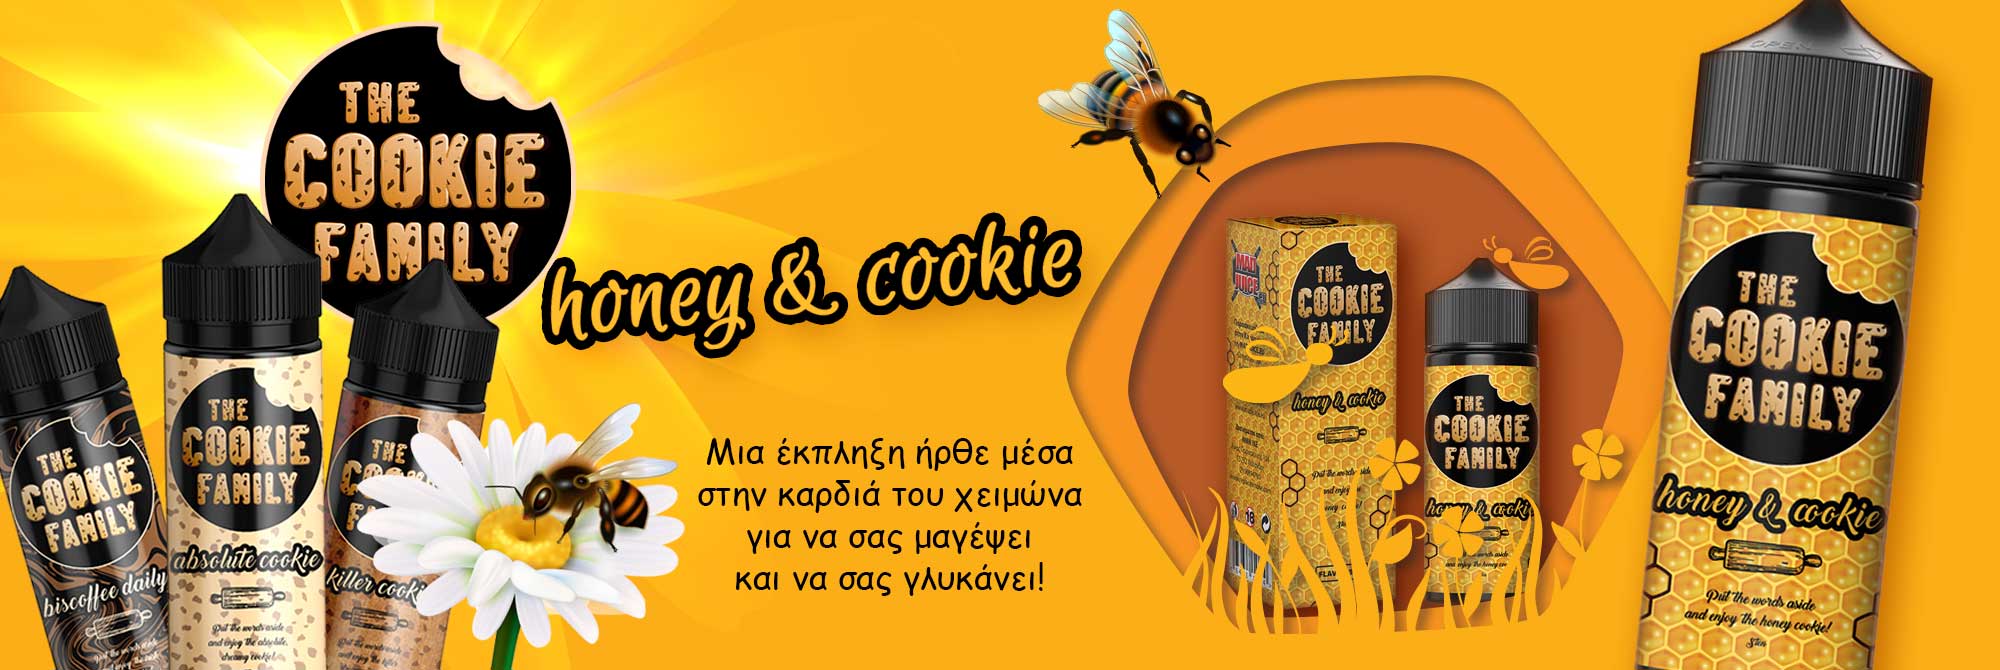 BANNER THE COOKIE FAMILY 2000x670px Honey Cookie inner